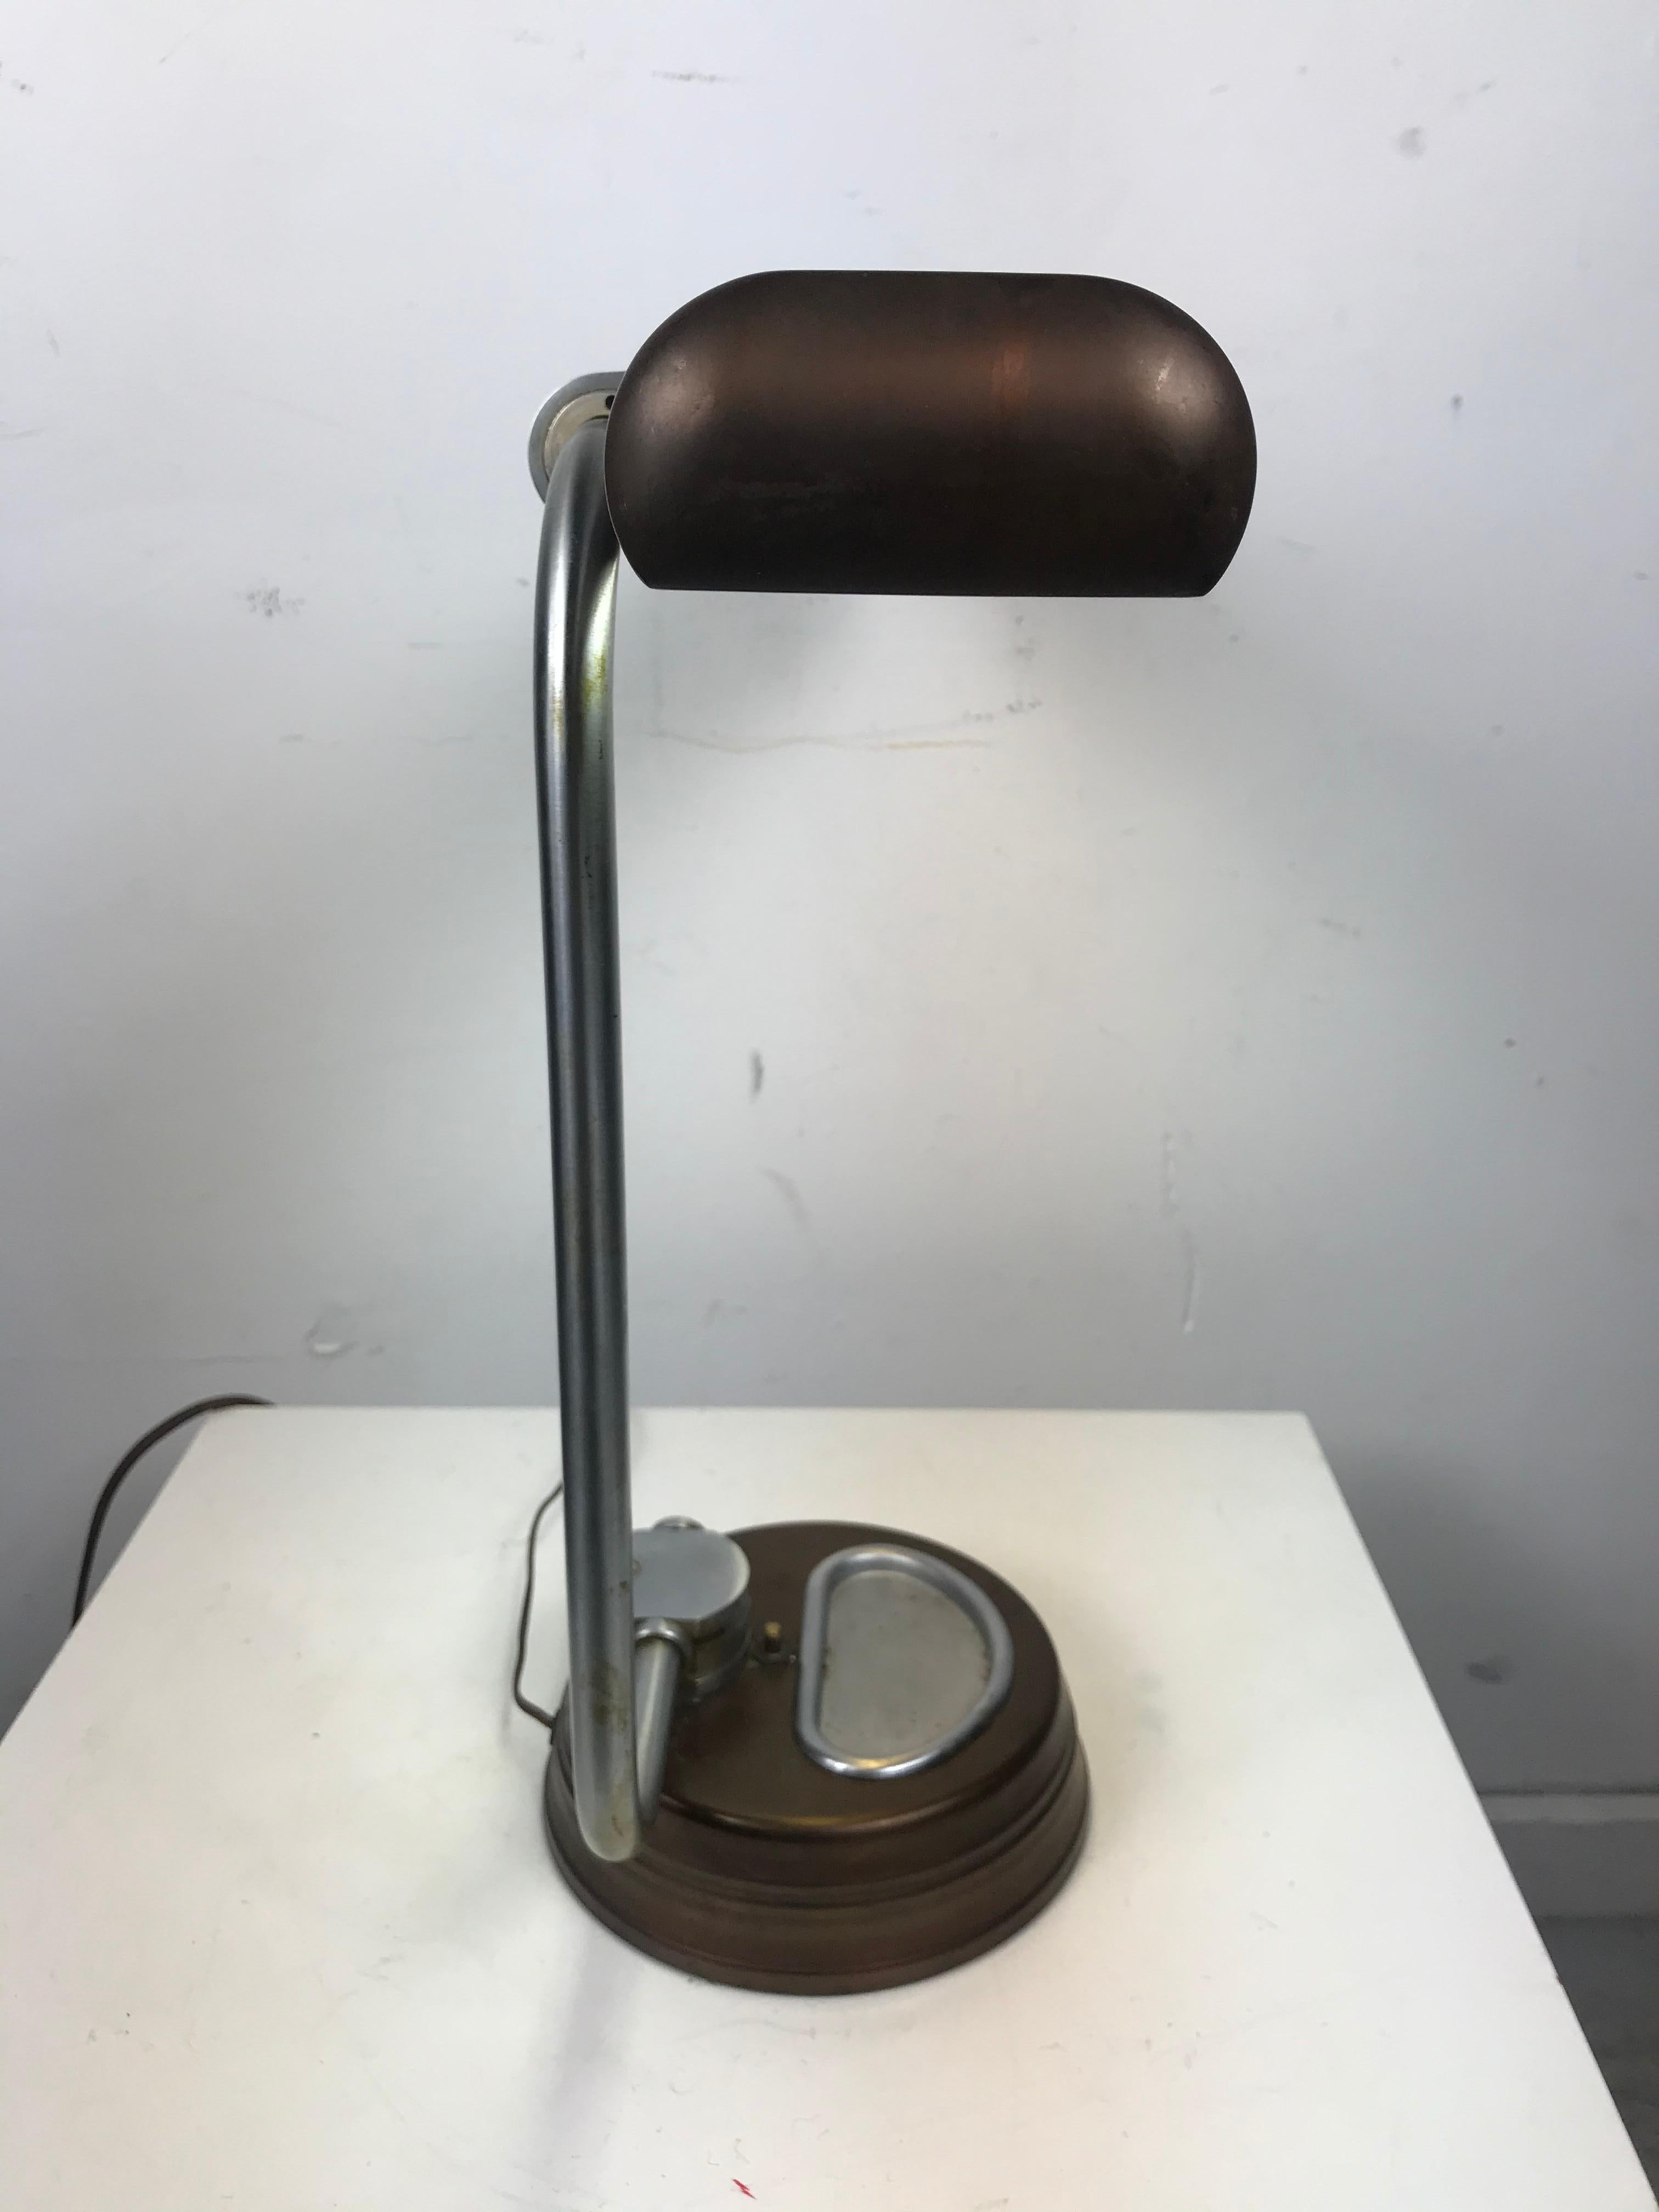 Modernist, Machine Age Stainless Steel / Metal Industrial Desk Lamp, Art Deco In Good Condition For Sale In Buffalo, NY